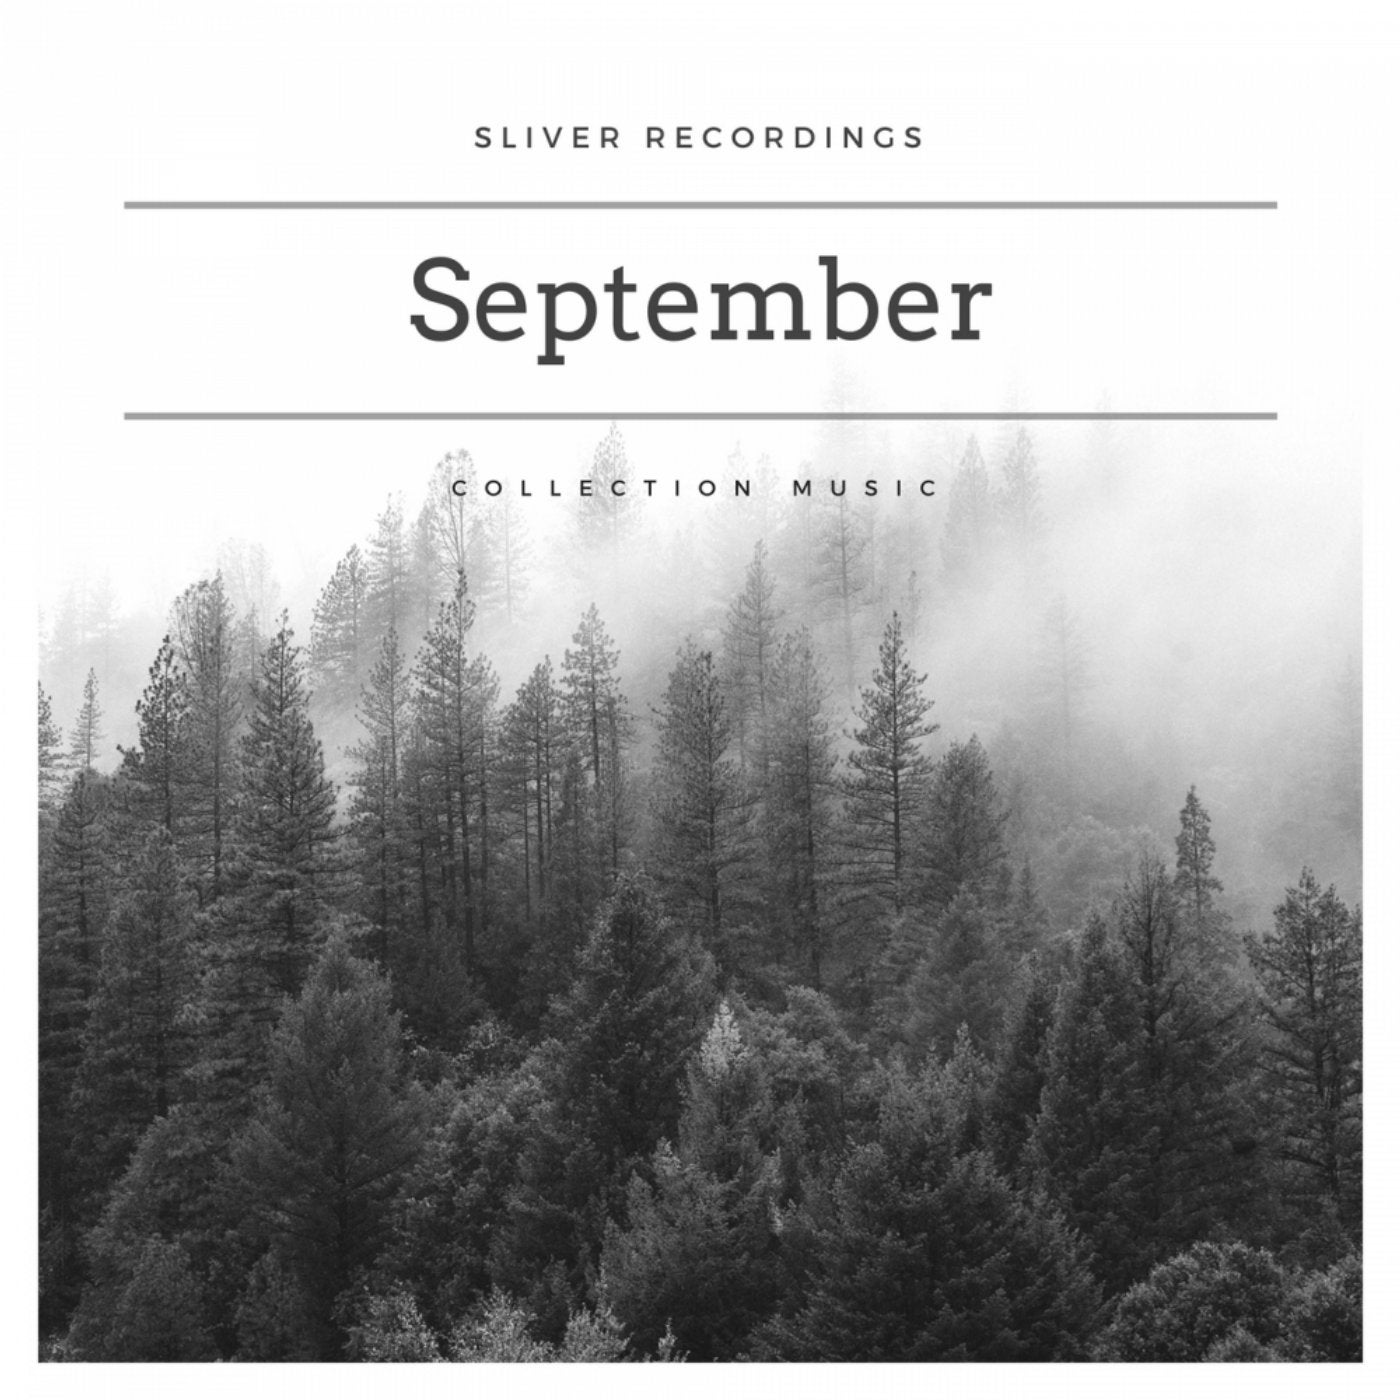 Sliver Recordings: September Collection Music